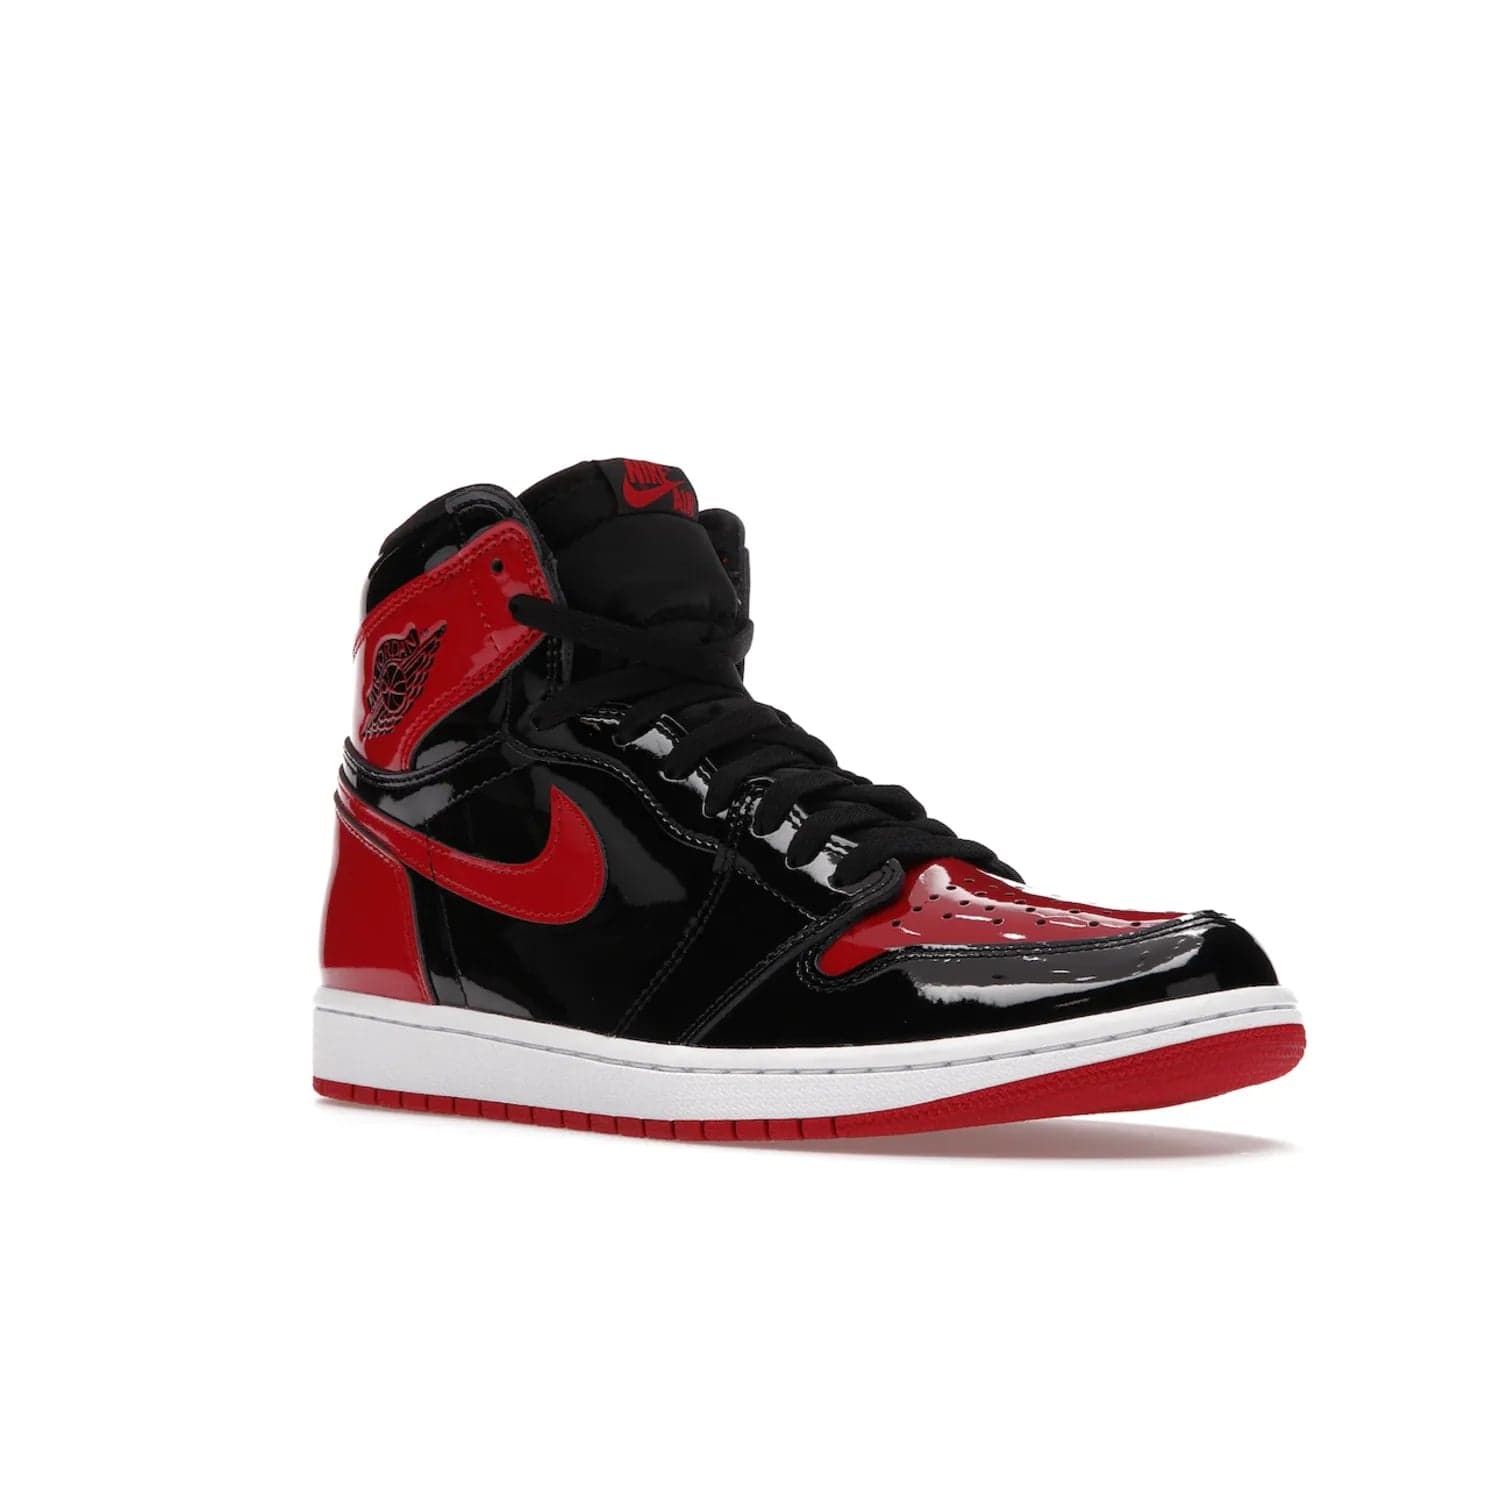 Jordan 1 Retro High OG Patent Bred - Image 5 - Only at www.BallersClubKickz.com - Introducing Air Jordan 1 Retro High OG Patent Bred - sleek patent leather upper, signature weaved Nike Air tongue and classic Wings logo on collar. Red and white sole complete signature look. Releasing December 2021 - perfect retro edition for holidays.